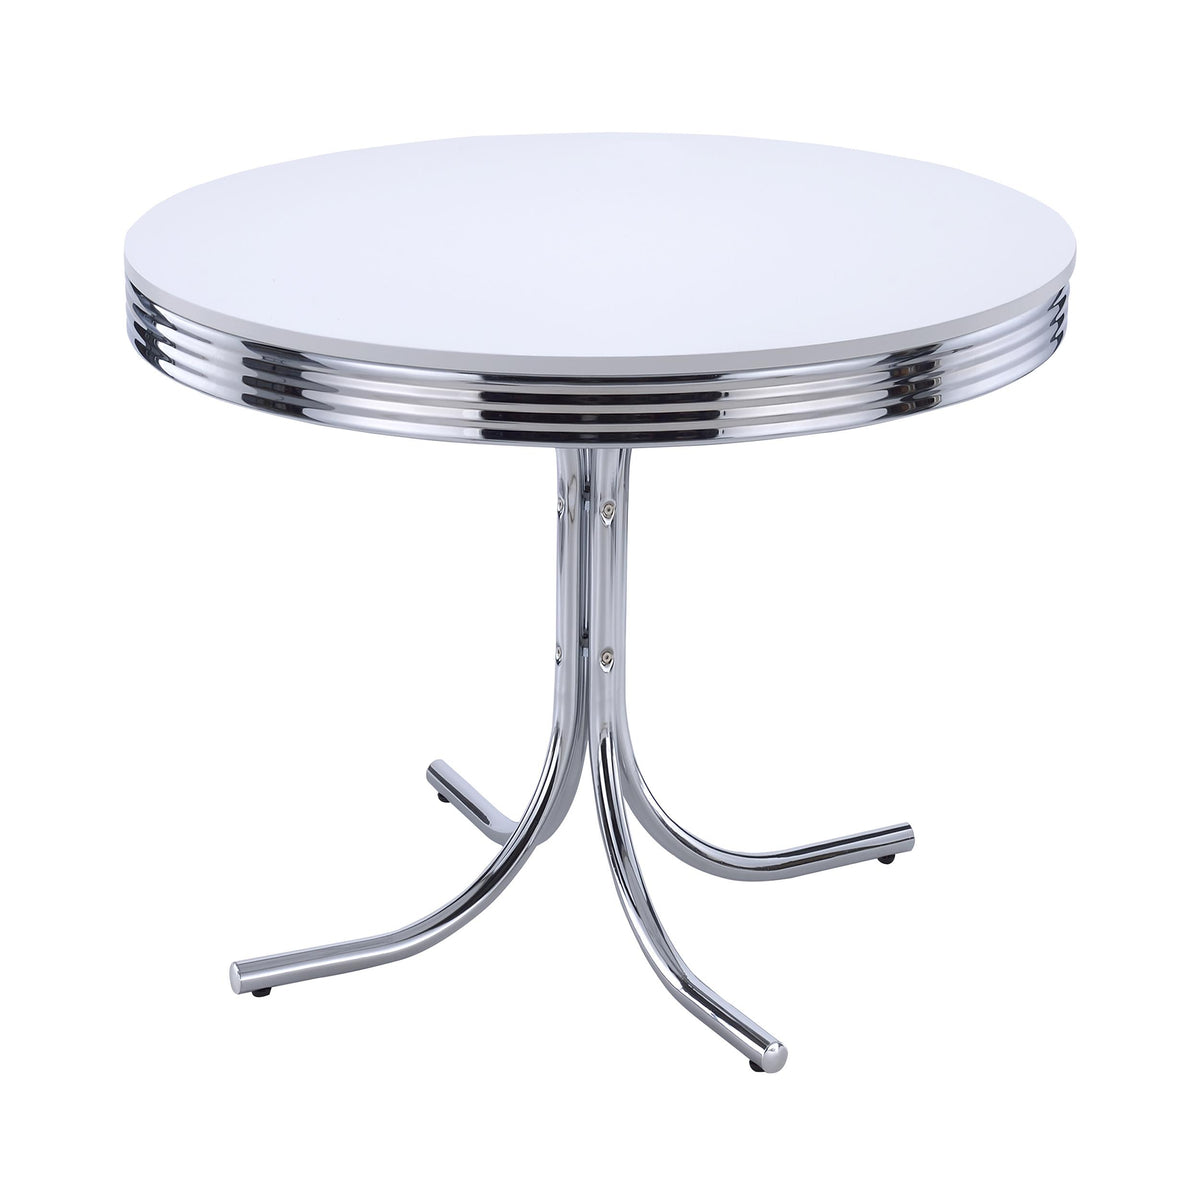 Retro Round Dining Table Glossy White and Chrome  Las Vegas Furniture Stores